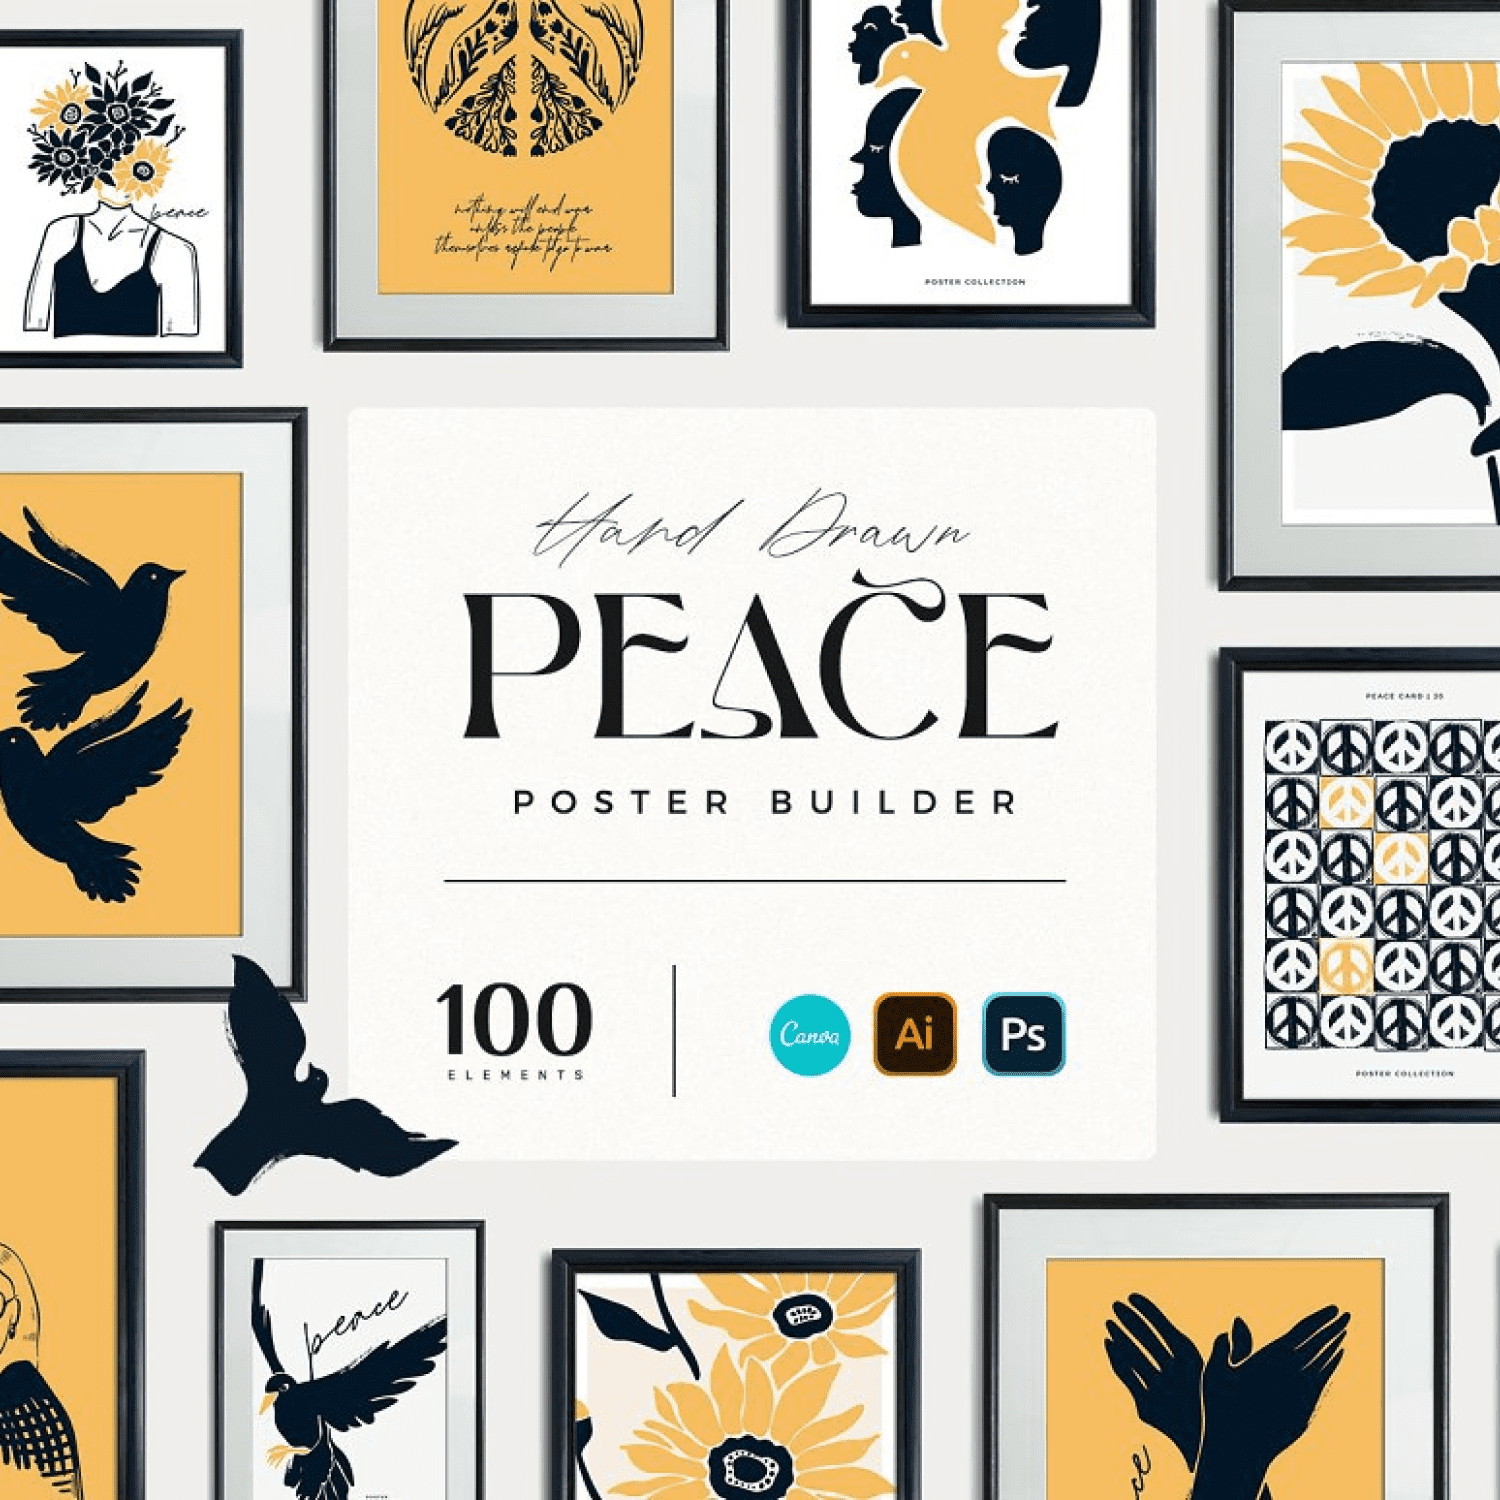 Peace poster builder - main image preview.